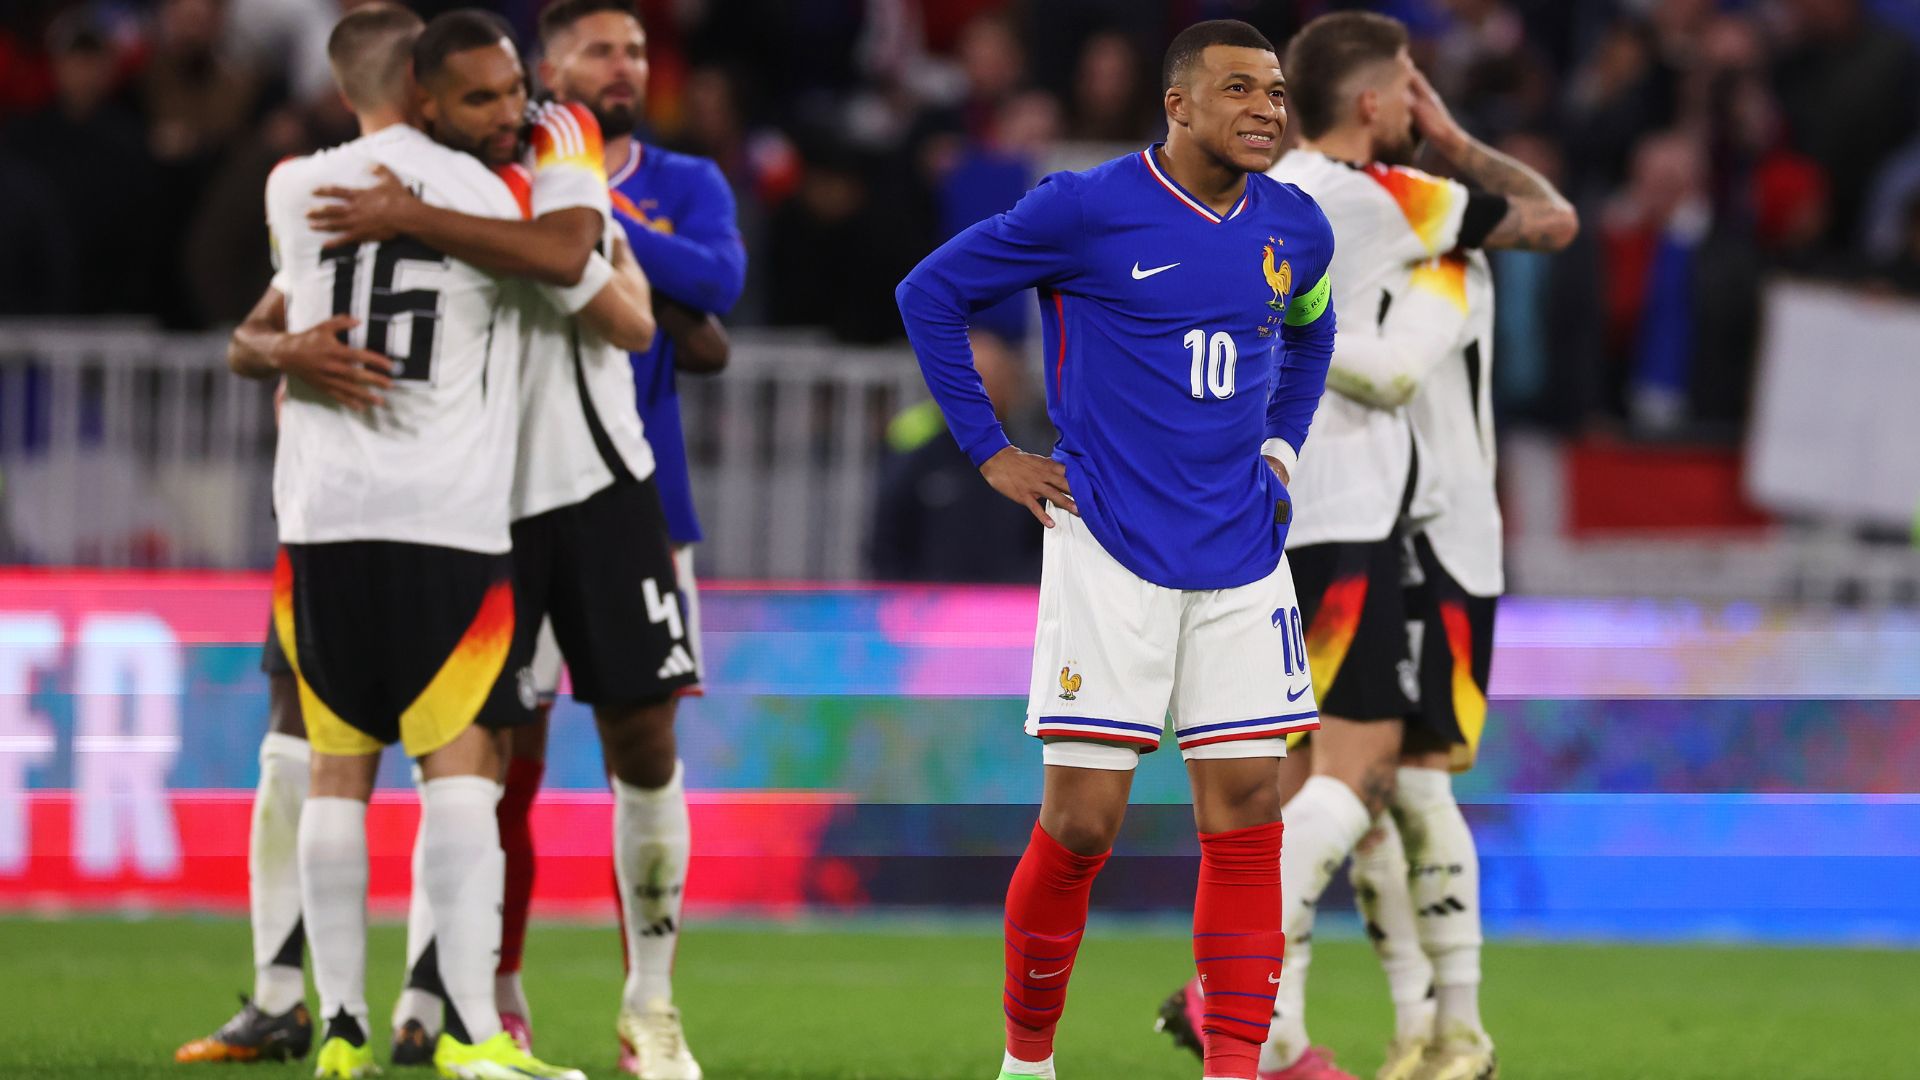 France ended the FIFA Data with one defeat and another victory